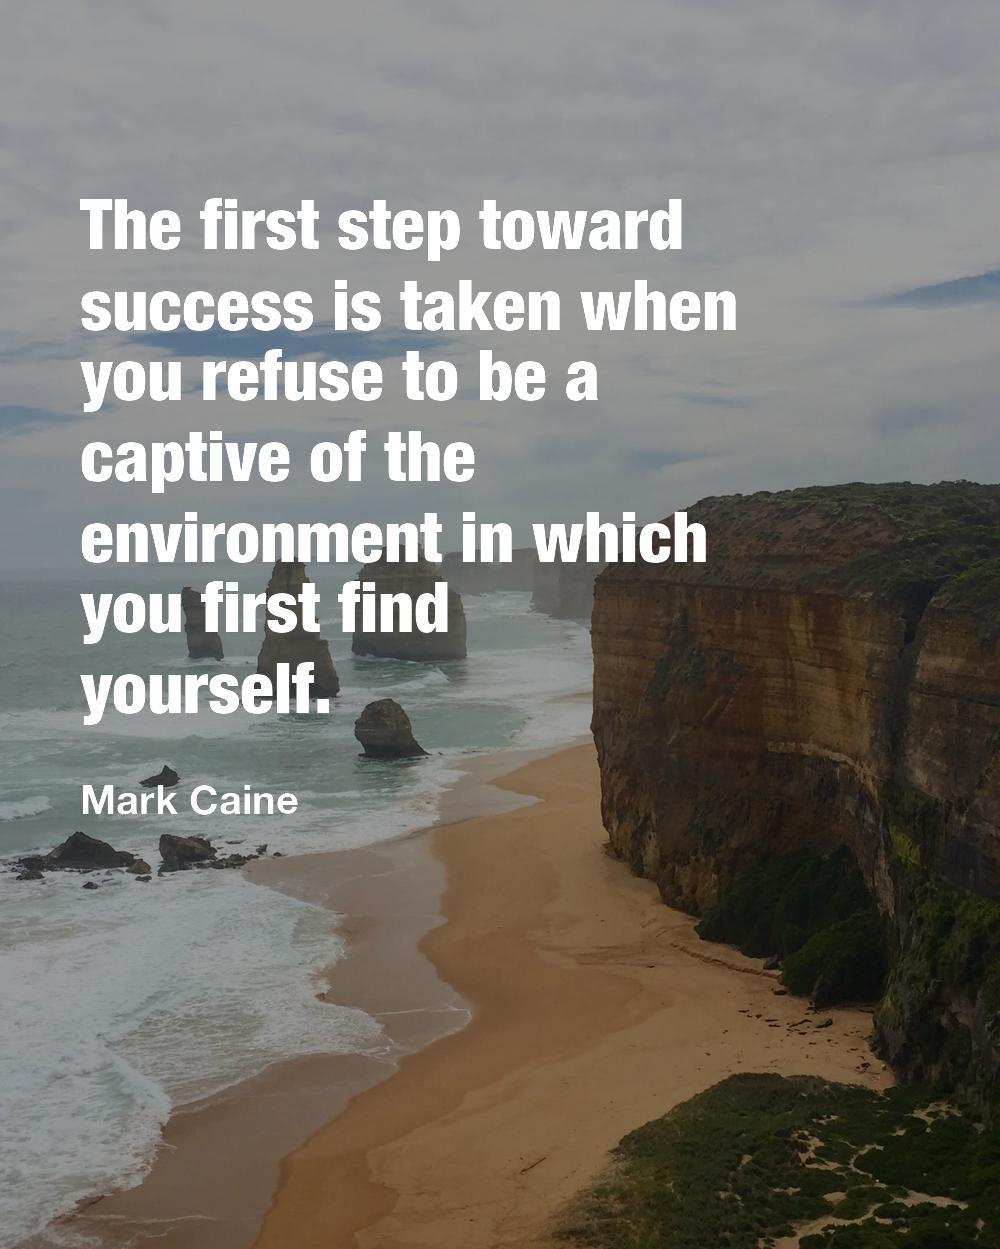 The first step toward success is taken when you refuse to be a captive of the environment in which you first find yourself.